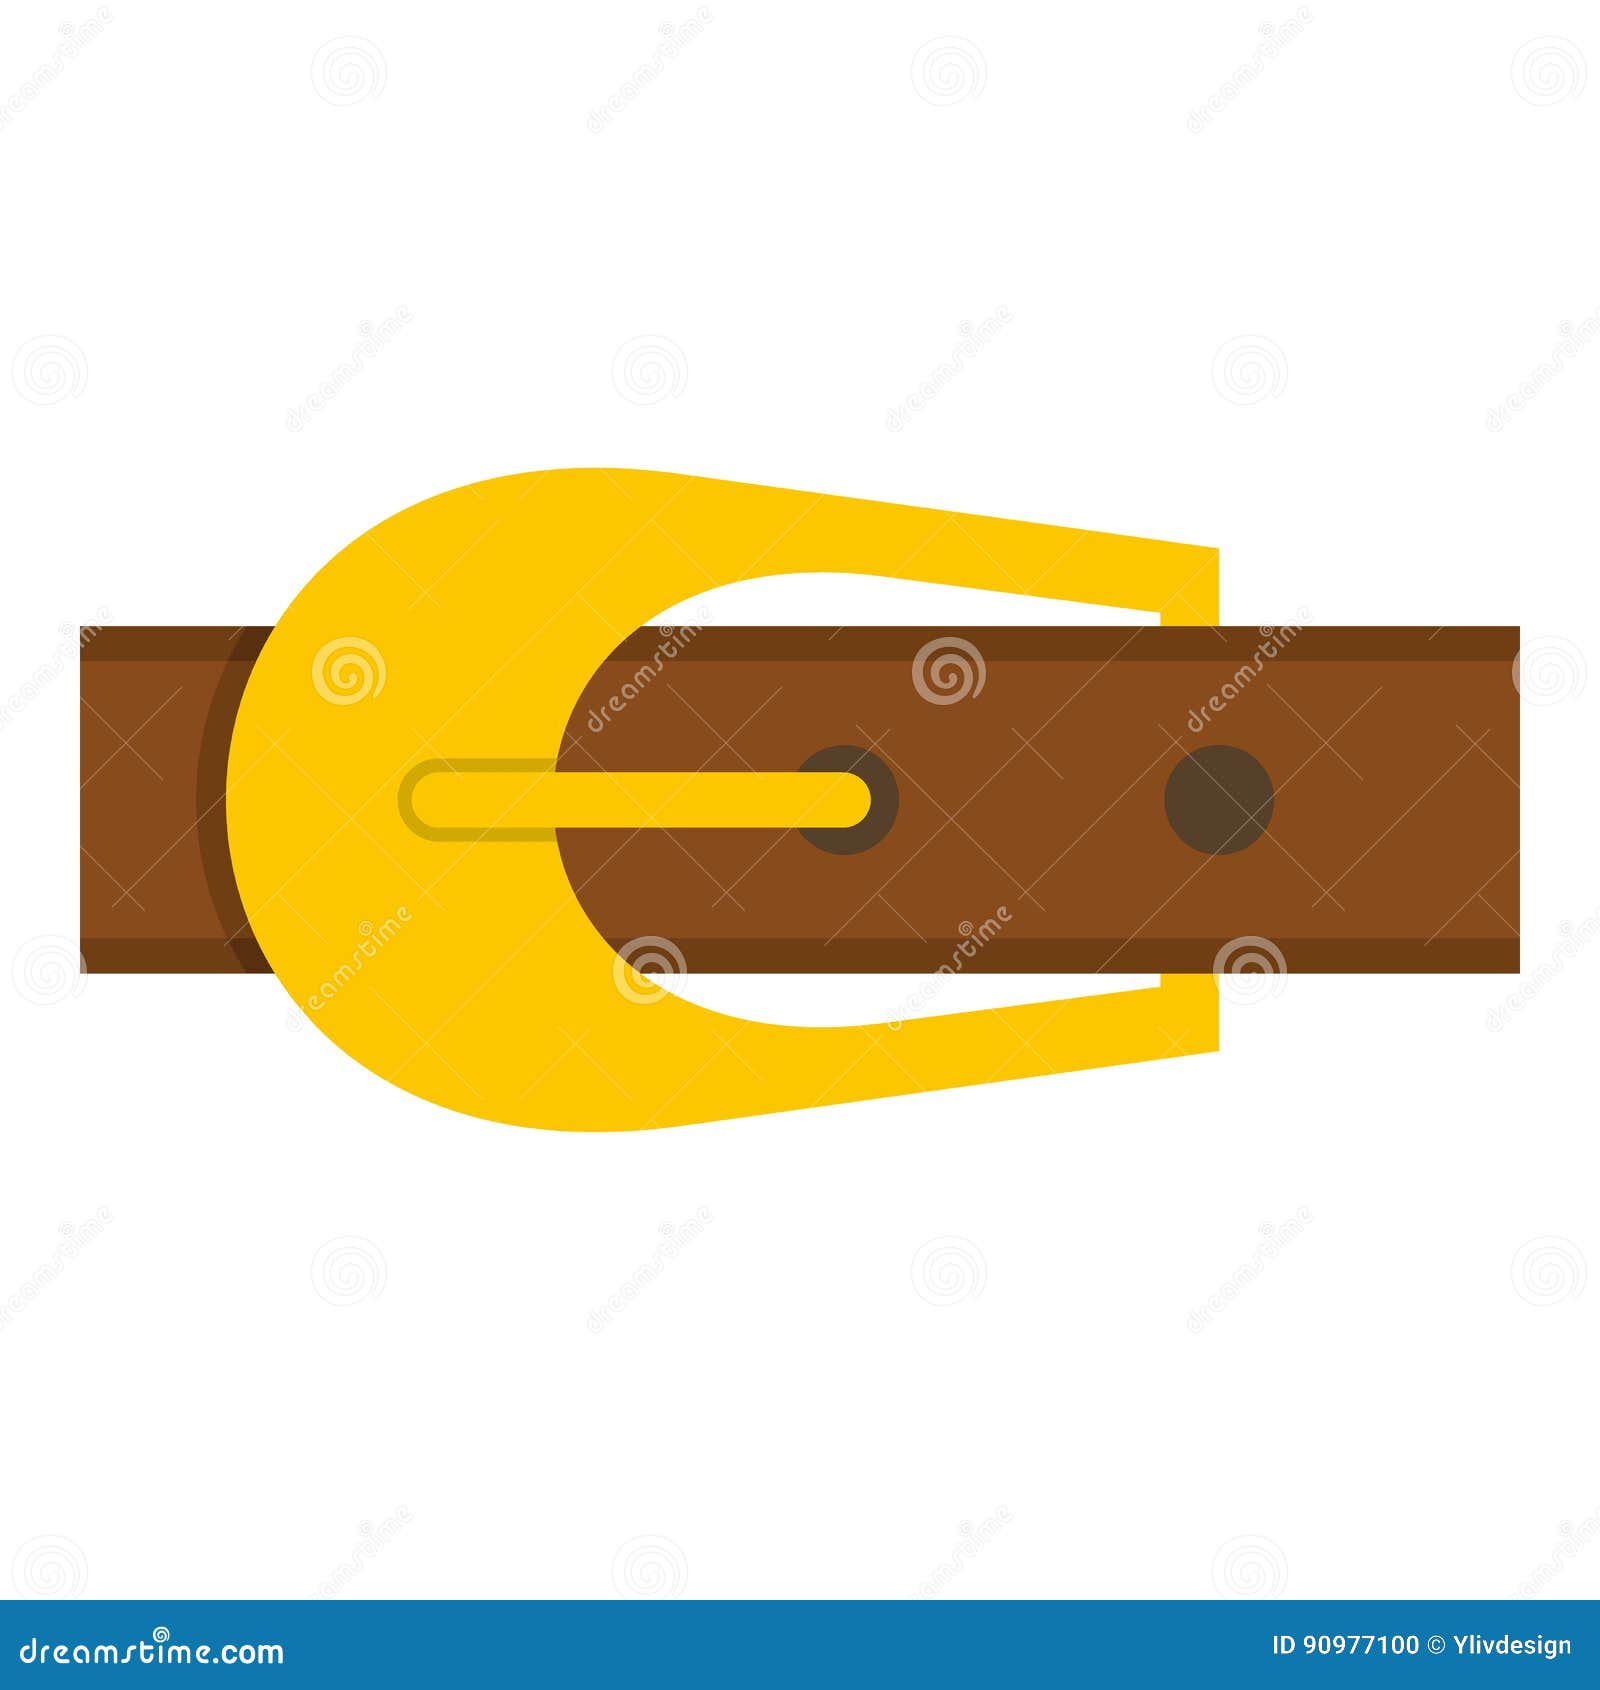 Brown belt icon isolated stock vector. Illustration of natural - 90977100